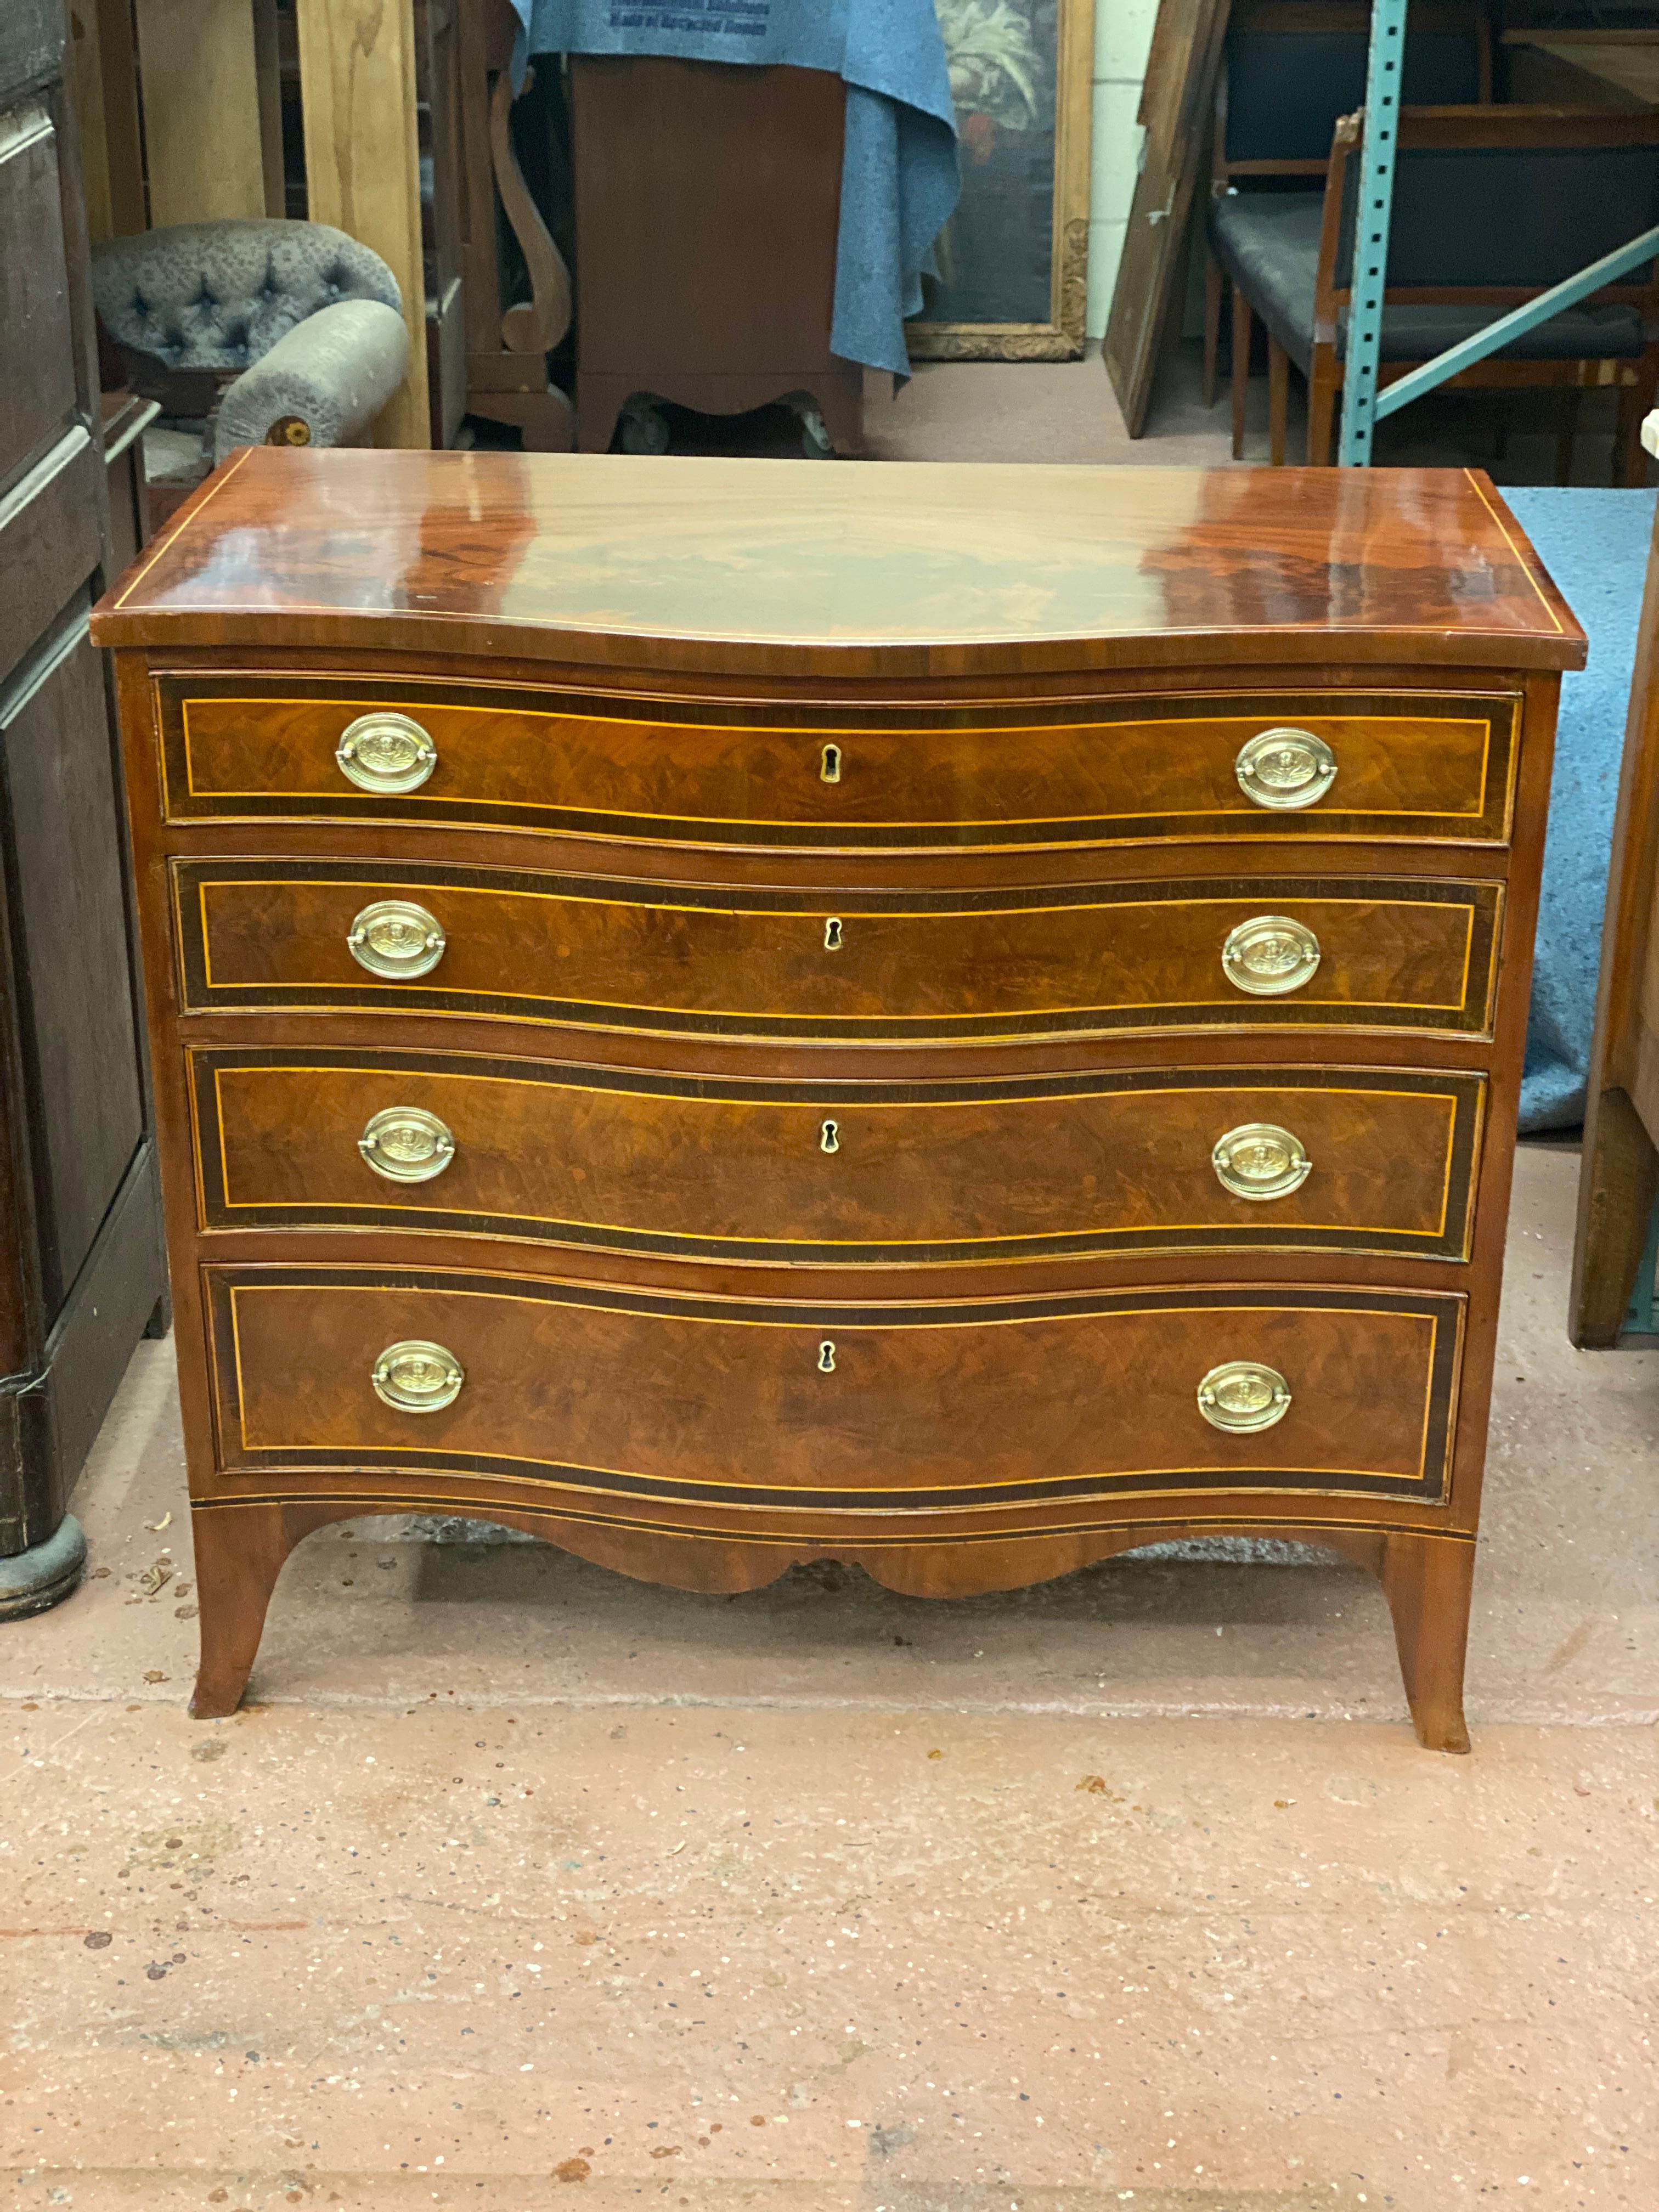 Handsome early to mid 19th century Serpentine front chest with four graduated drawers The drawer fronts are banded with rosewood and satinwood veneer. The brass bail pulls are decorated with rosettes. The top is highly French polished crotched